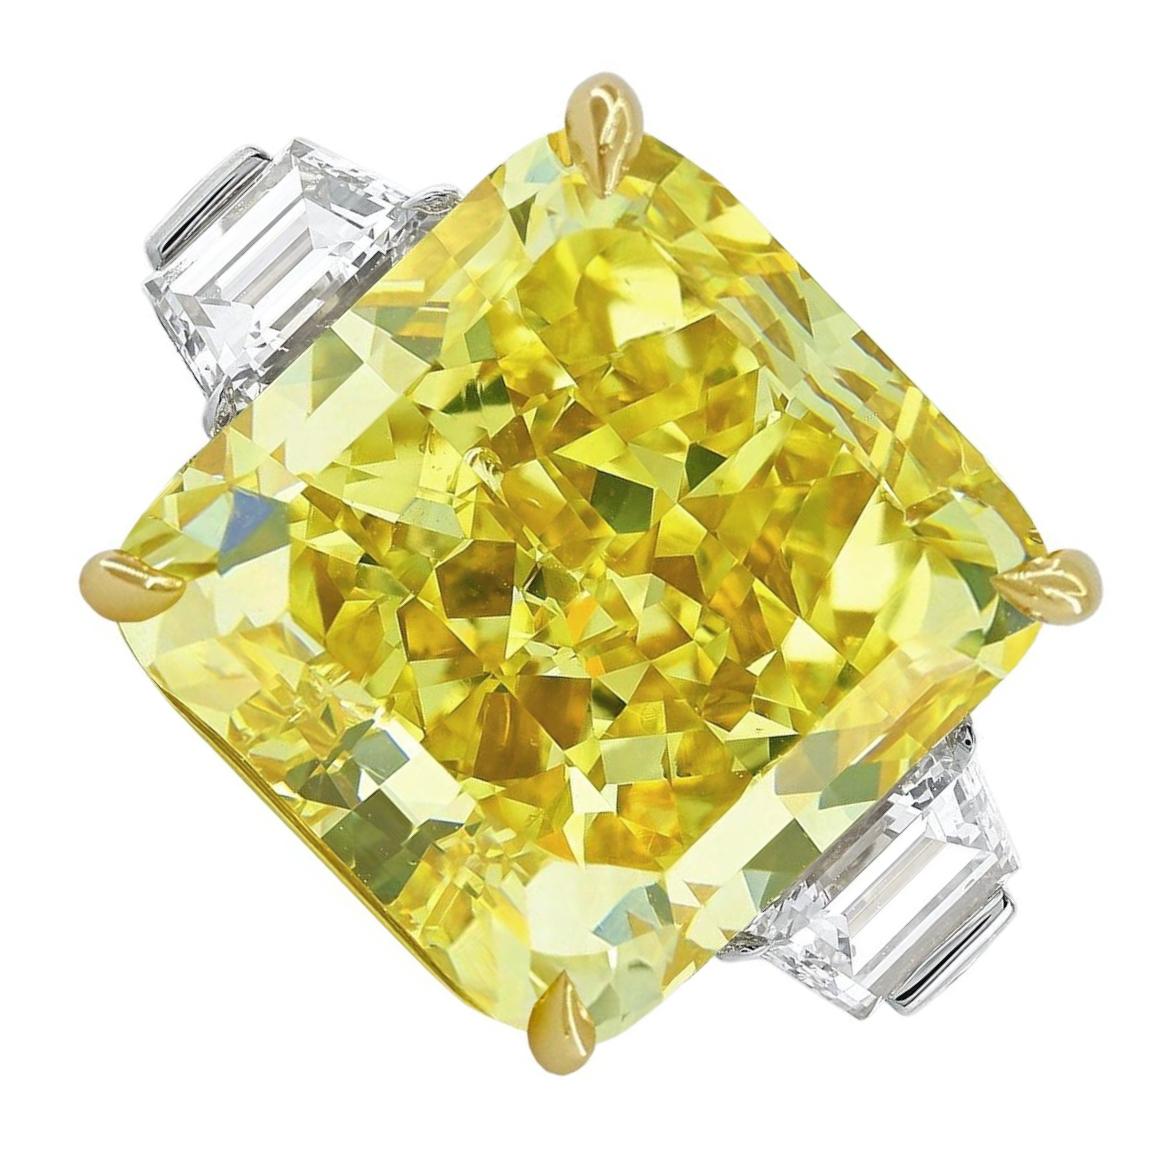  GIA Certified 12 Carat Diamond Fancy Yellow Radiant Diamond Ring, set in solid platinum and 18K yellow gold.

Crafted to perfection and certified by GIA, this breathtaking ring features a stunning 12 carat radiant cut diamond with a mesmerizing